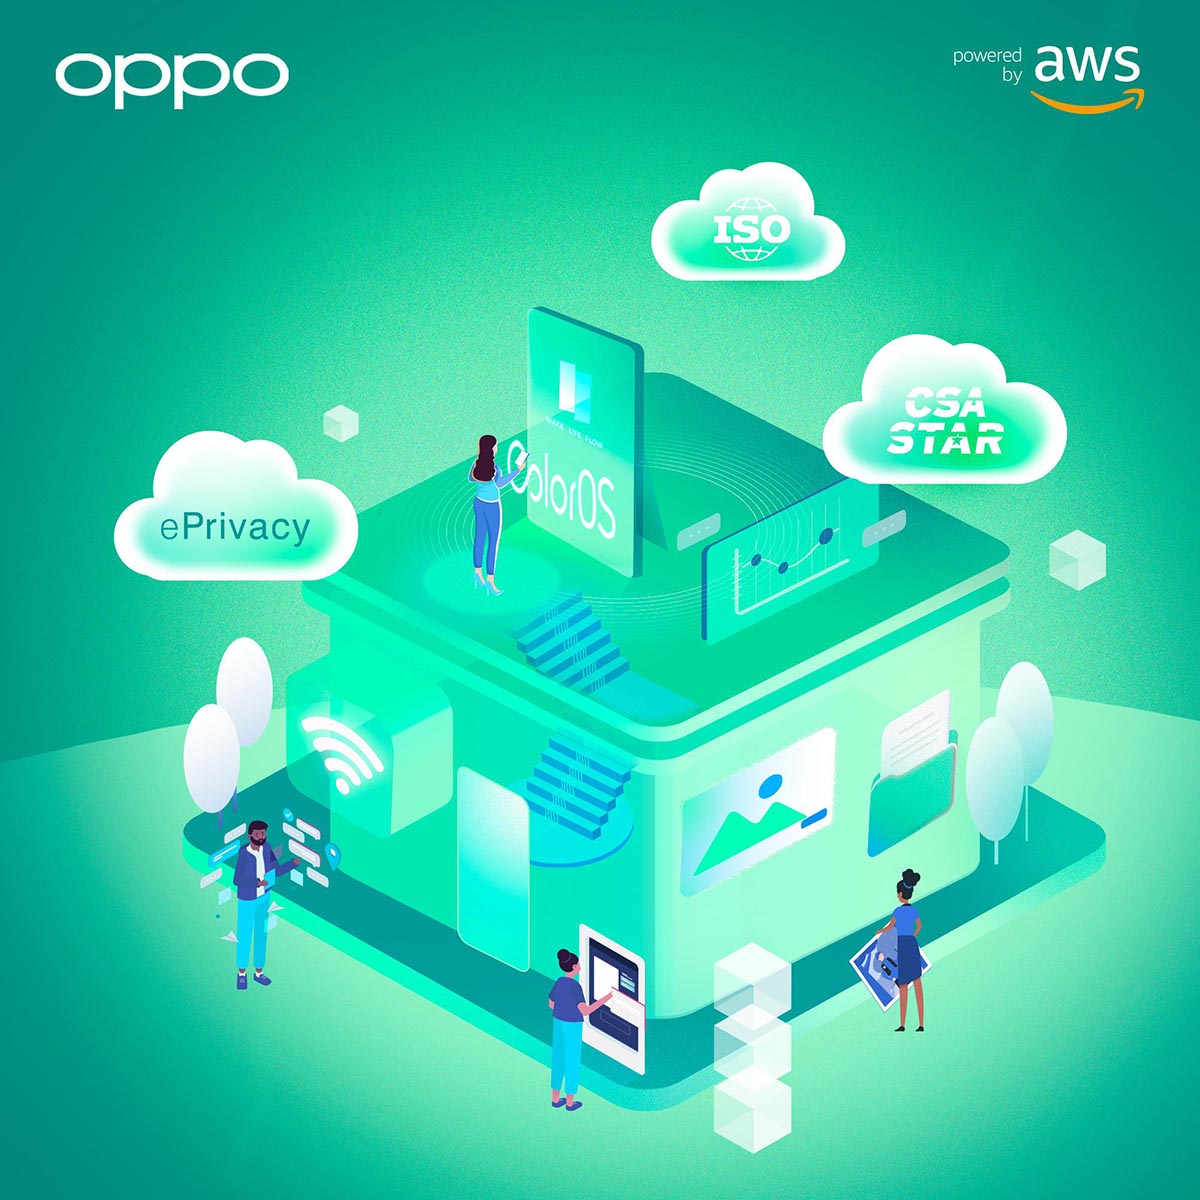 OPPO partners with Amazon Web Services  for Power-Enhanced, More Secure Mobile Experience